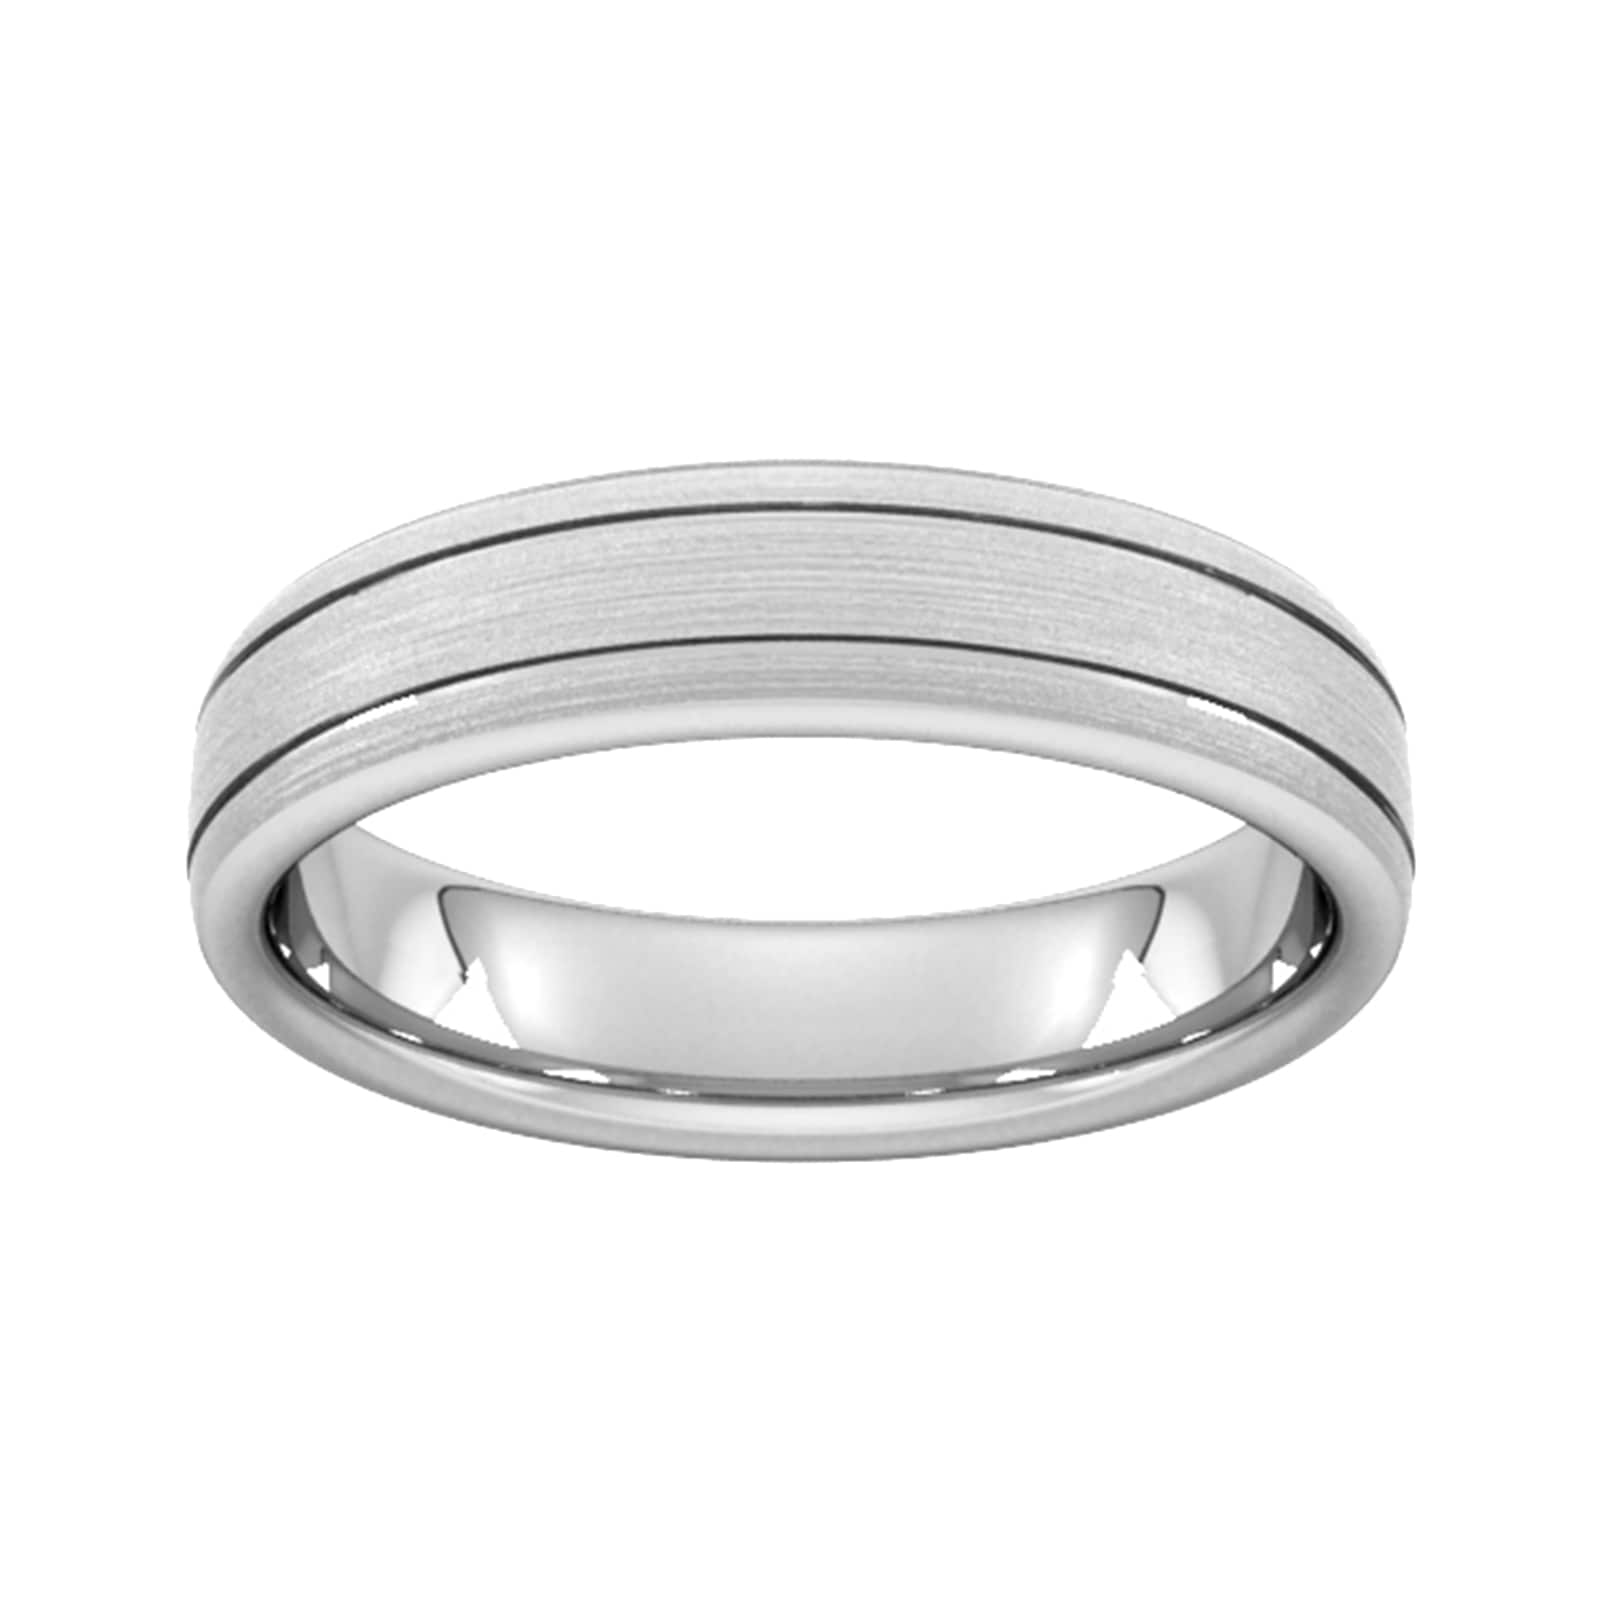 5mm Traditional Court Heavy Matt Finish With Double Grooves Wedding Ring In 950 Palladium - Ring Size H